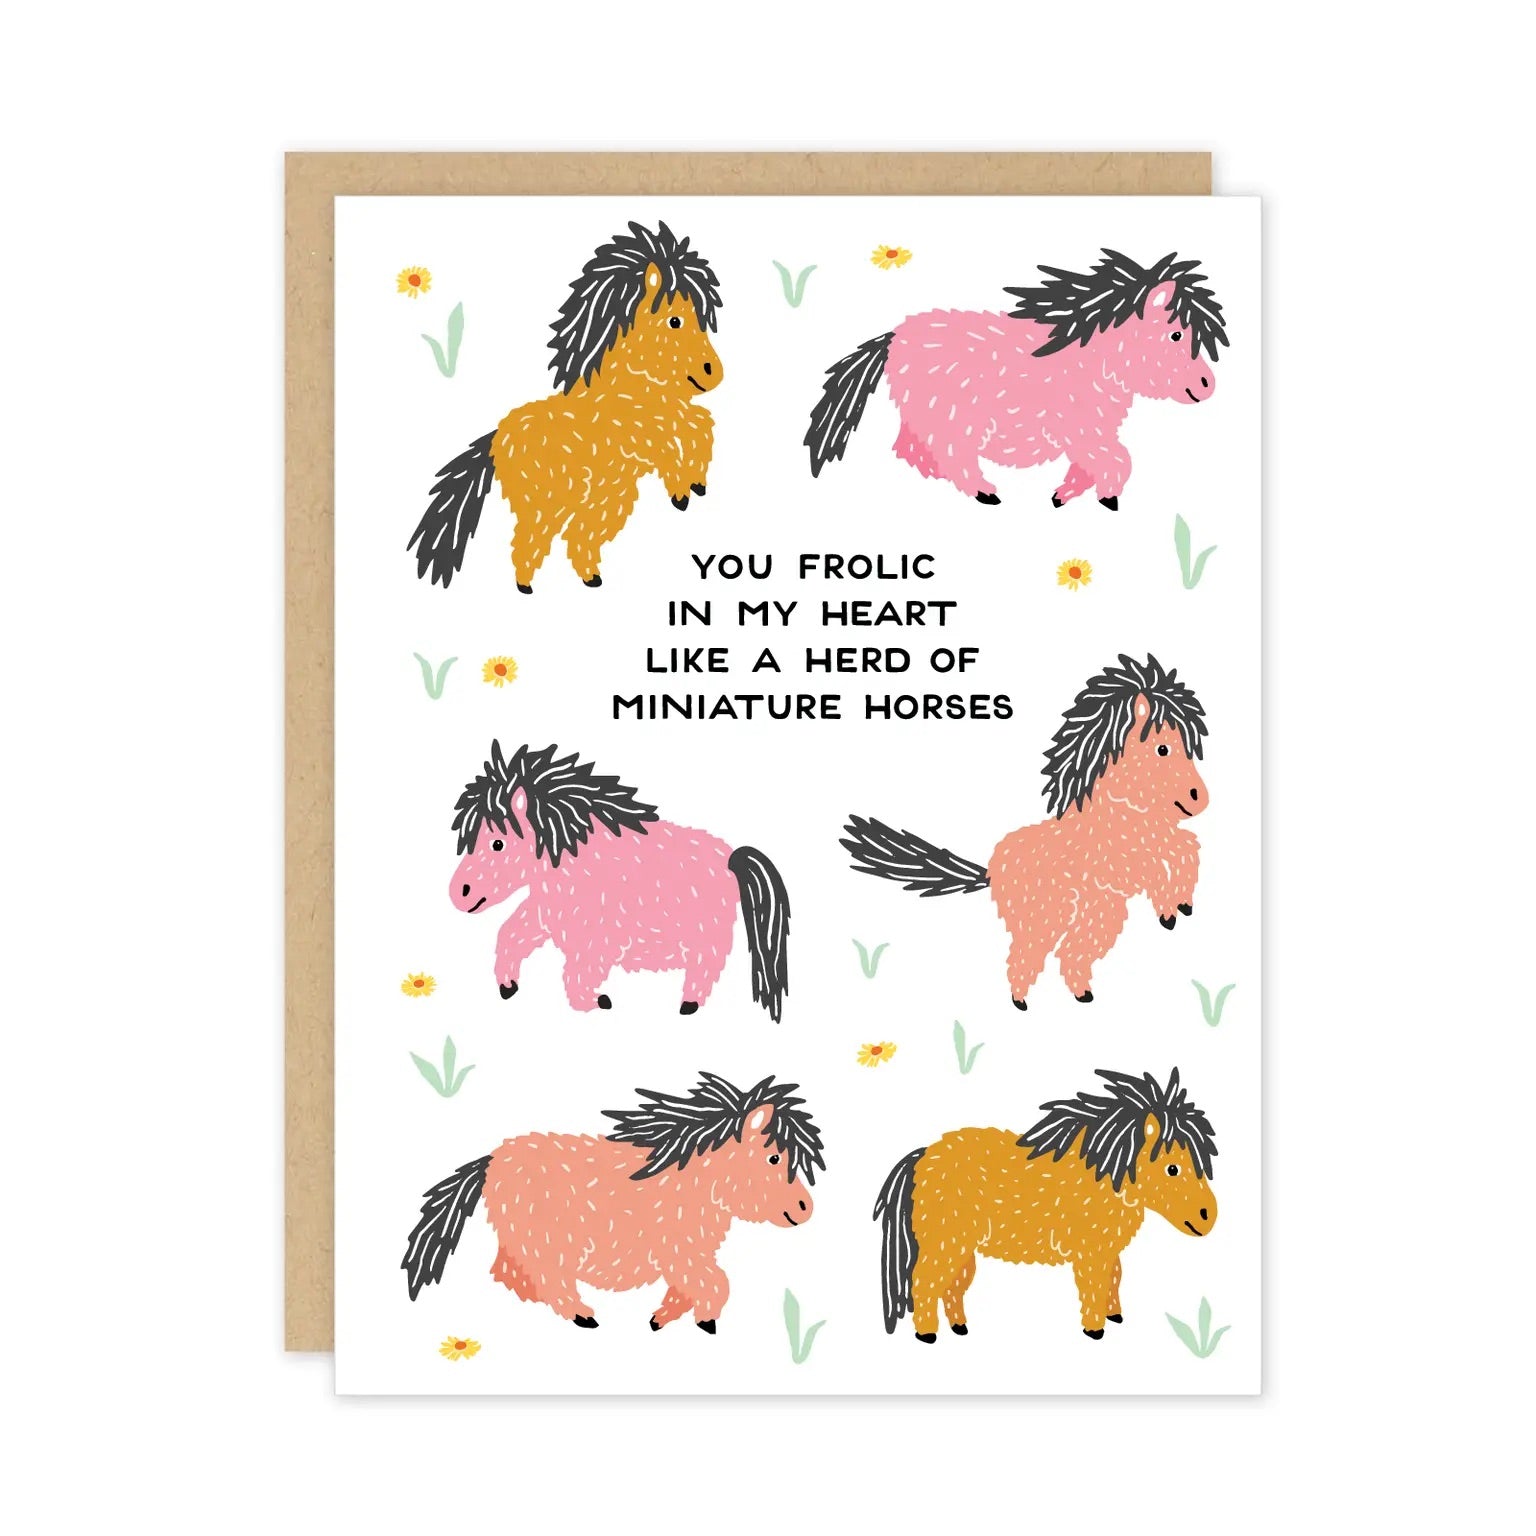 White card featuring tiny horse illustrations. Black text reads "you frolic in my heart like a herd of miniature horses"